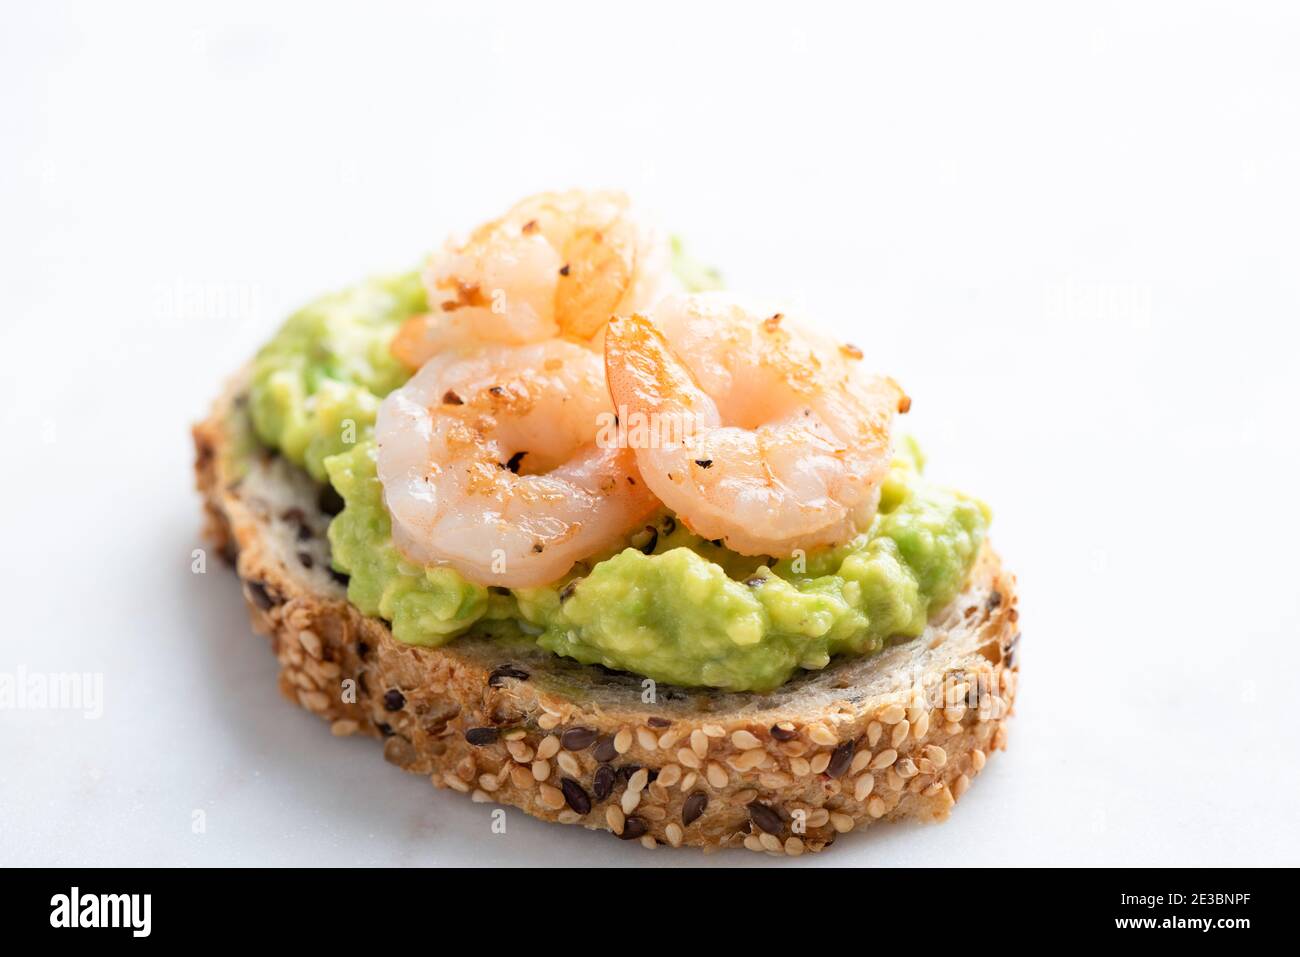 Appetizer toast or bruschetta with avocado cream and shrimps isolated on white marble background Stock Photo